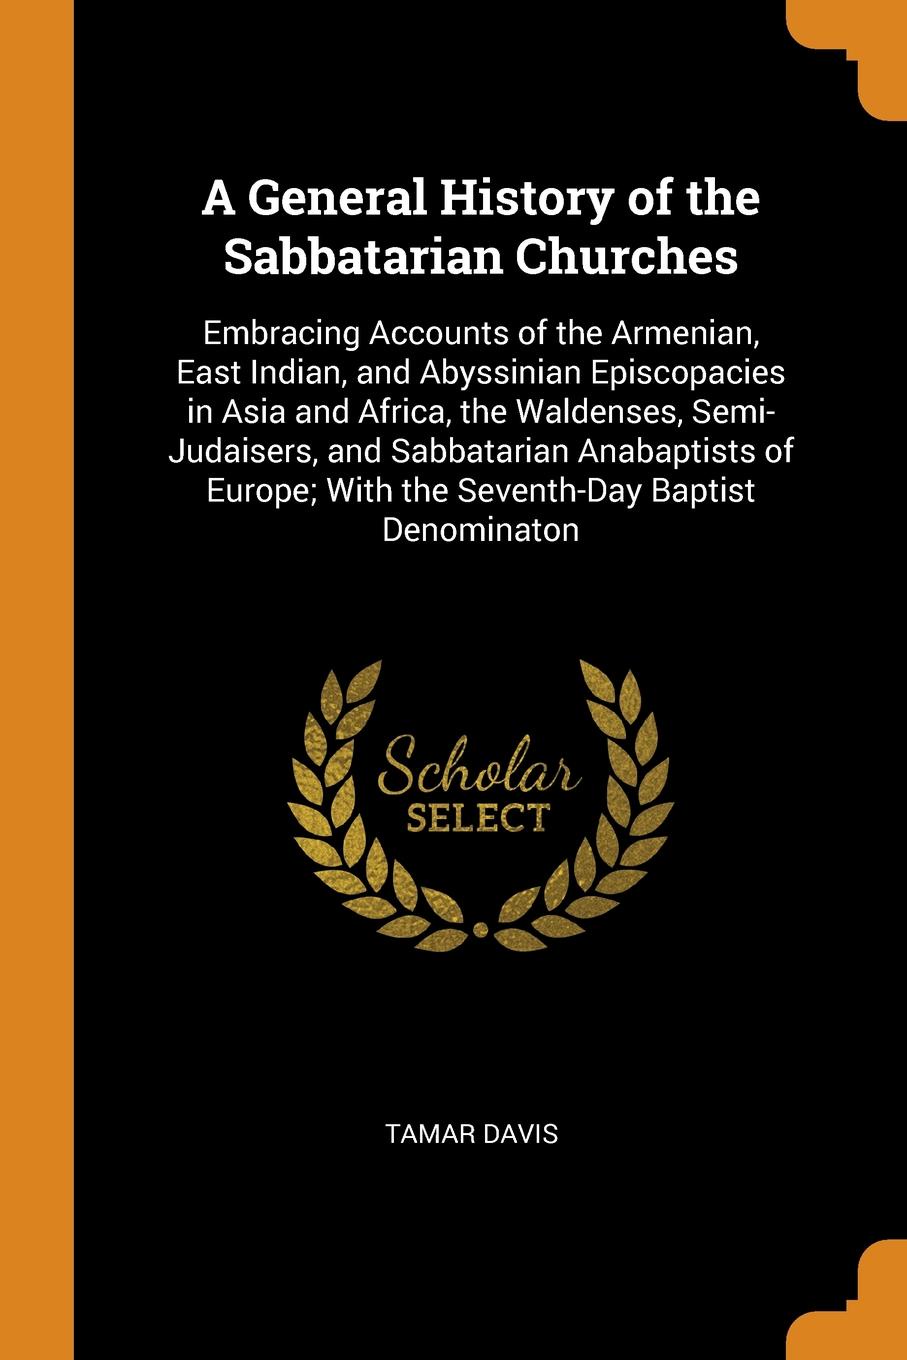 A General History of the Sabbatarian Churches. Embracing Accounts of the Armenian, East Indian, and Abyssinian Episcopacies in Asia and Africa, the Waldenses, Semi-Judaisers, and Sabbatarian Anabaptists of Europe; With the Seventh-Day Baptist Deno...